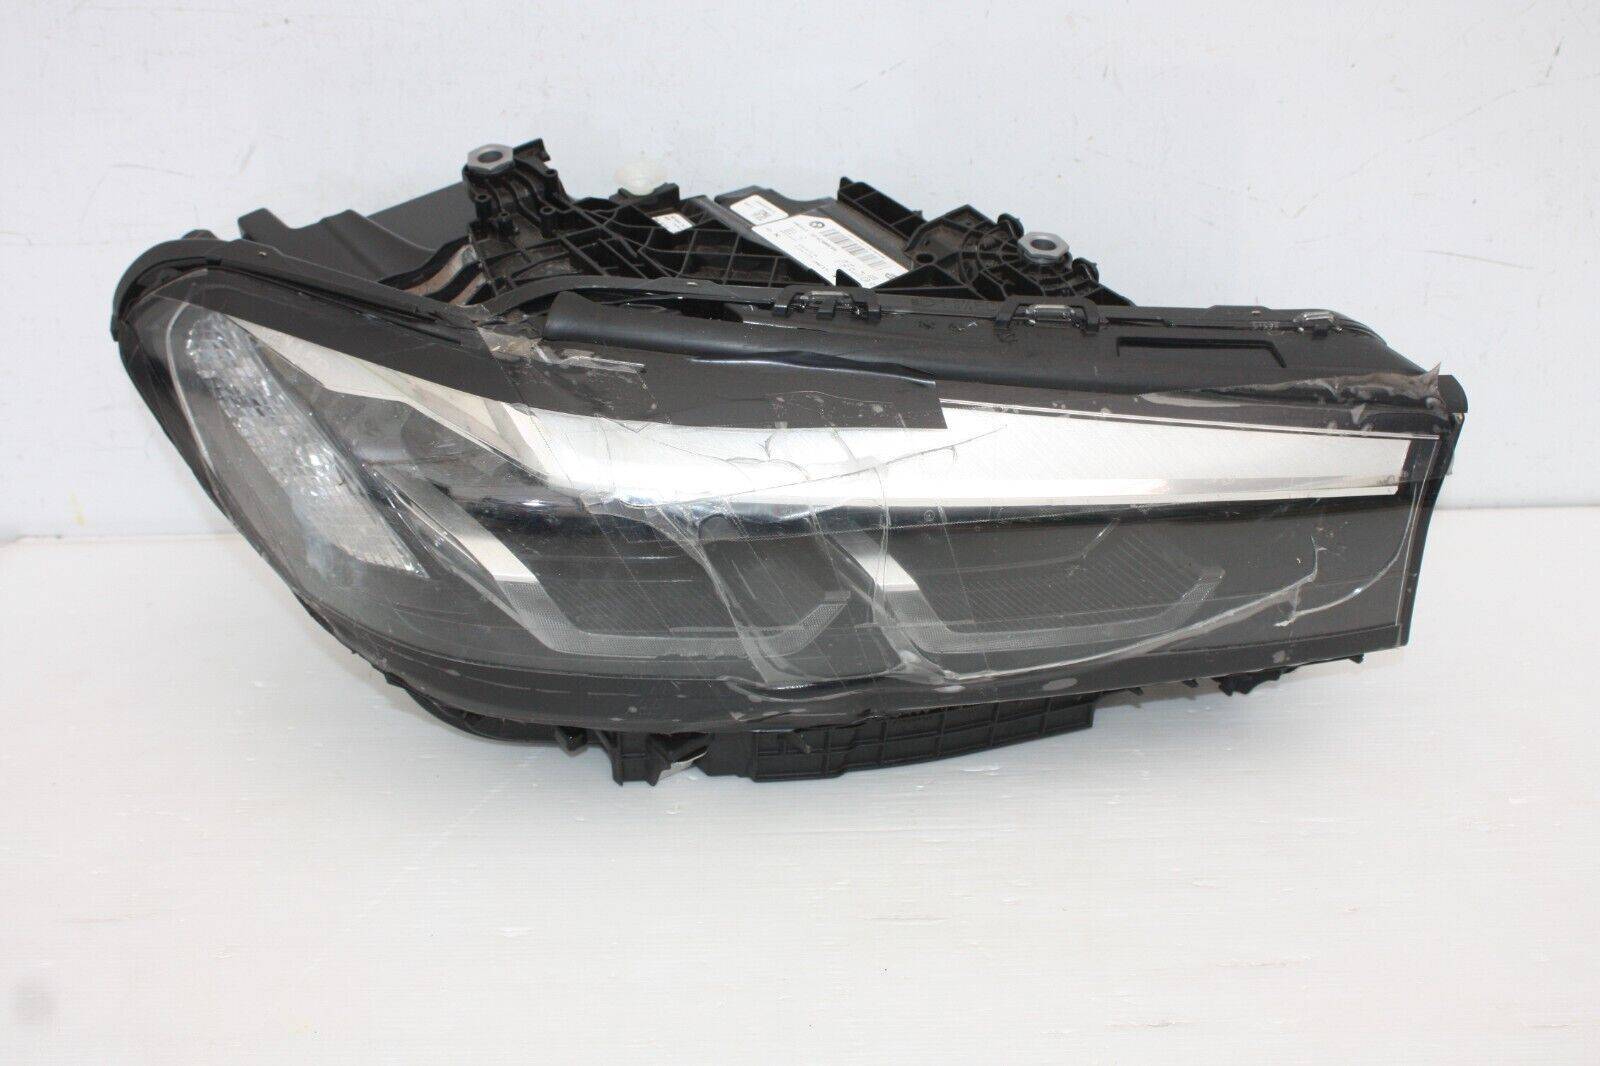 BMW X5 X6 G05 G06 Right Side LED Headlight 5A388C6 02 SEE PICS AS ITS DAMAGED 175444559307